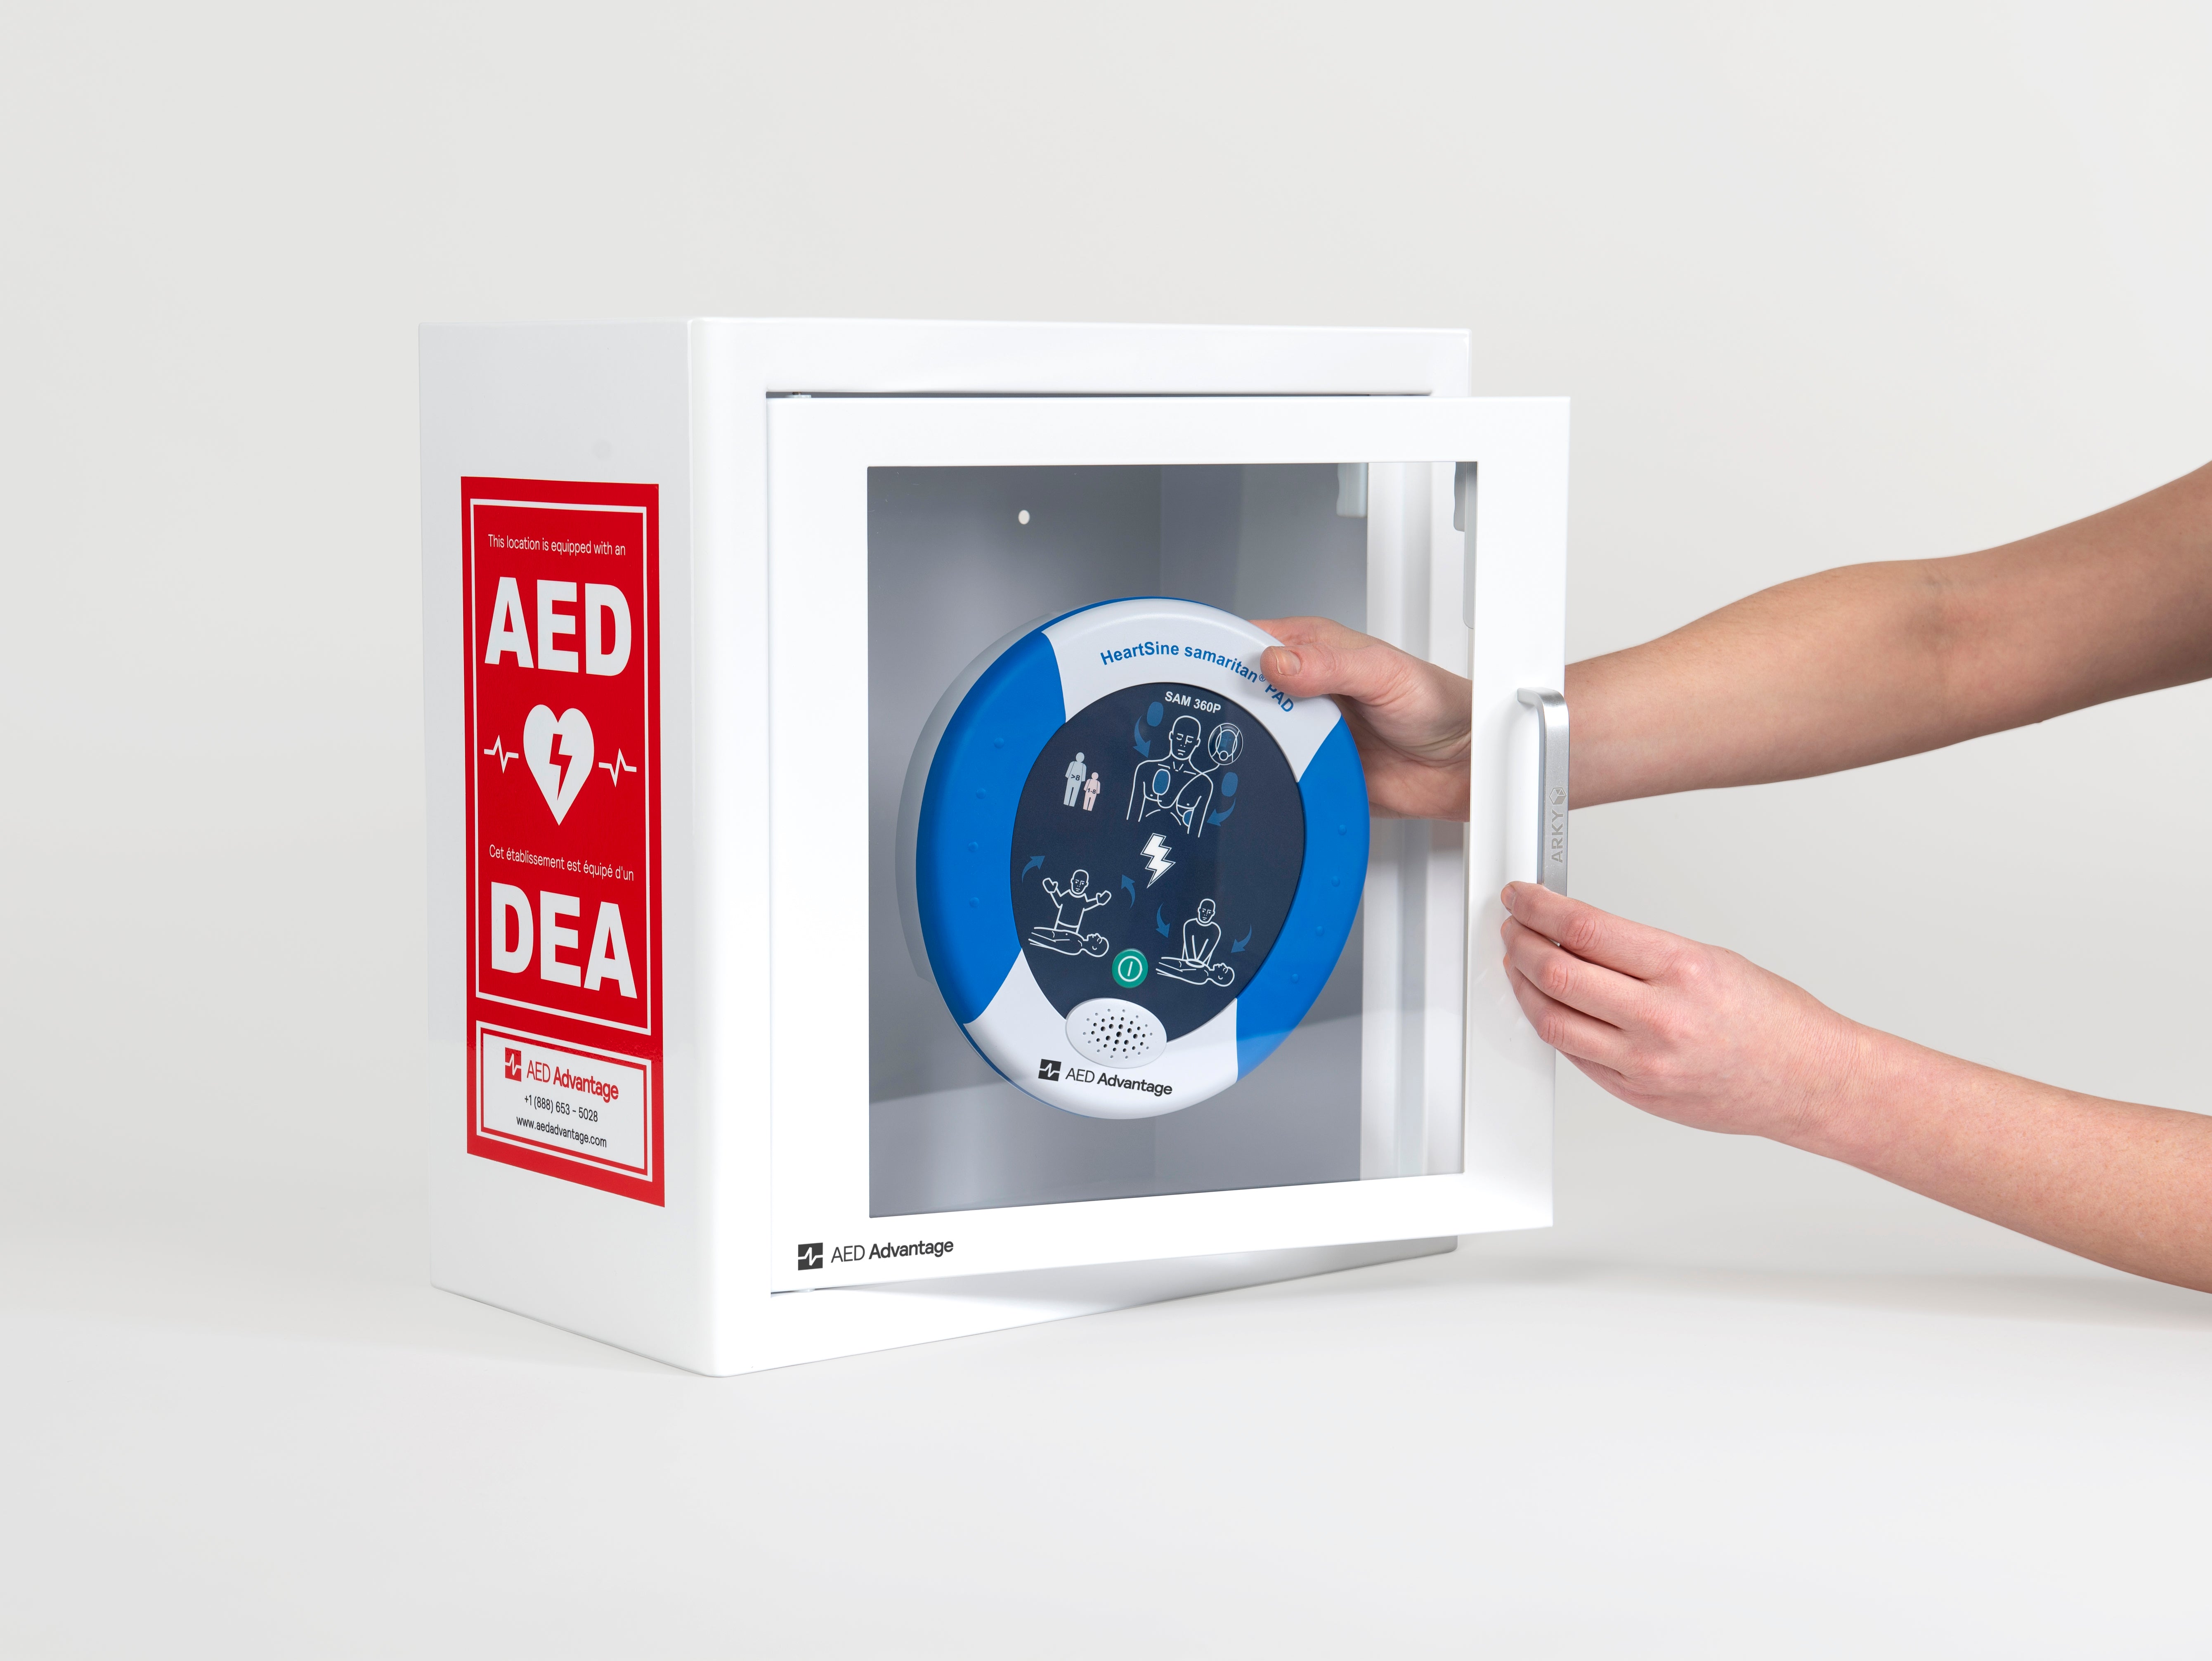 A blue and white HeartSine 360P AED being retrieved by hand from a white metal cabinet with red decals